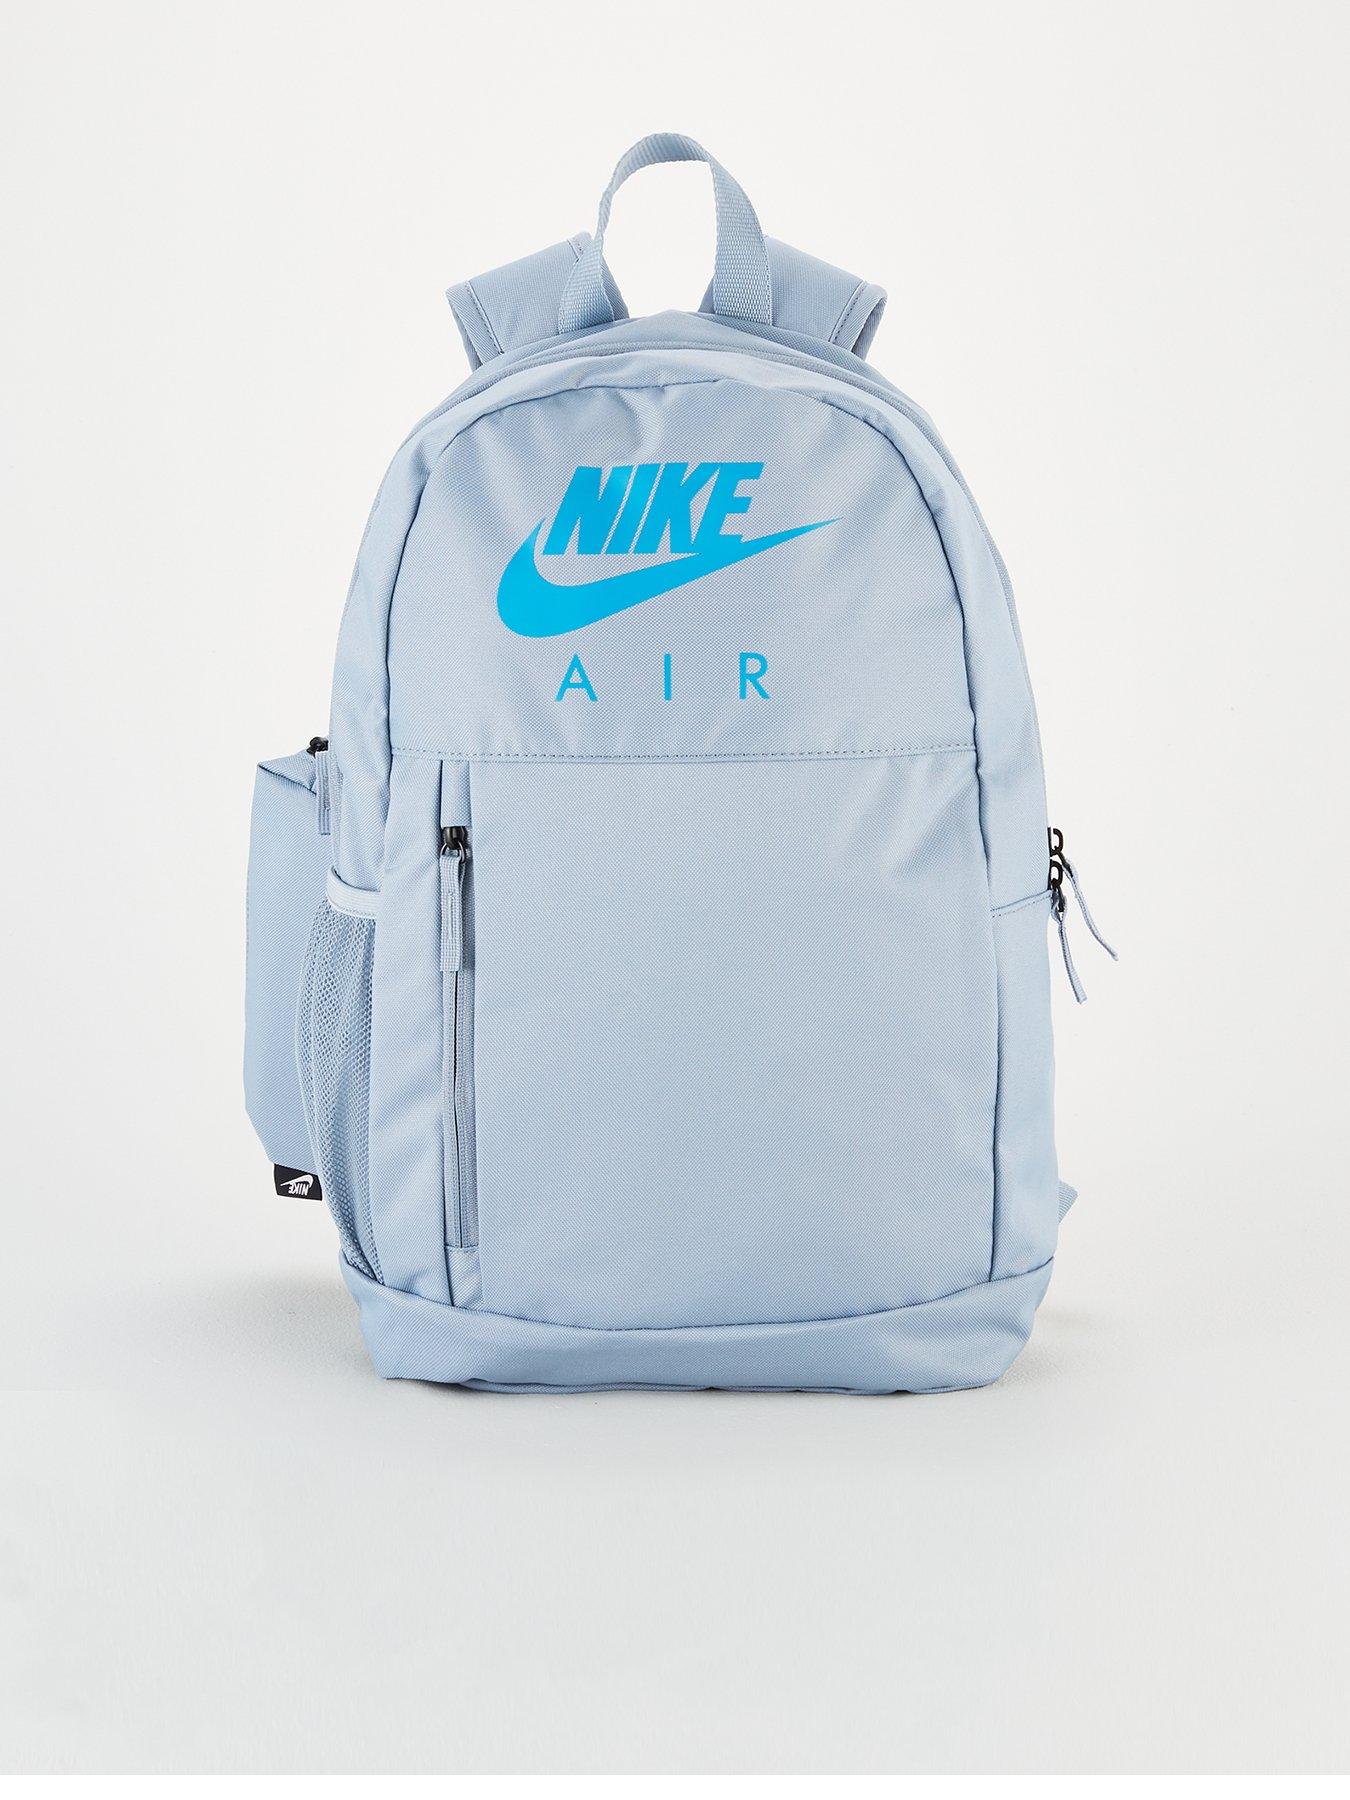 nike bag with pencil case